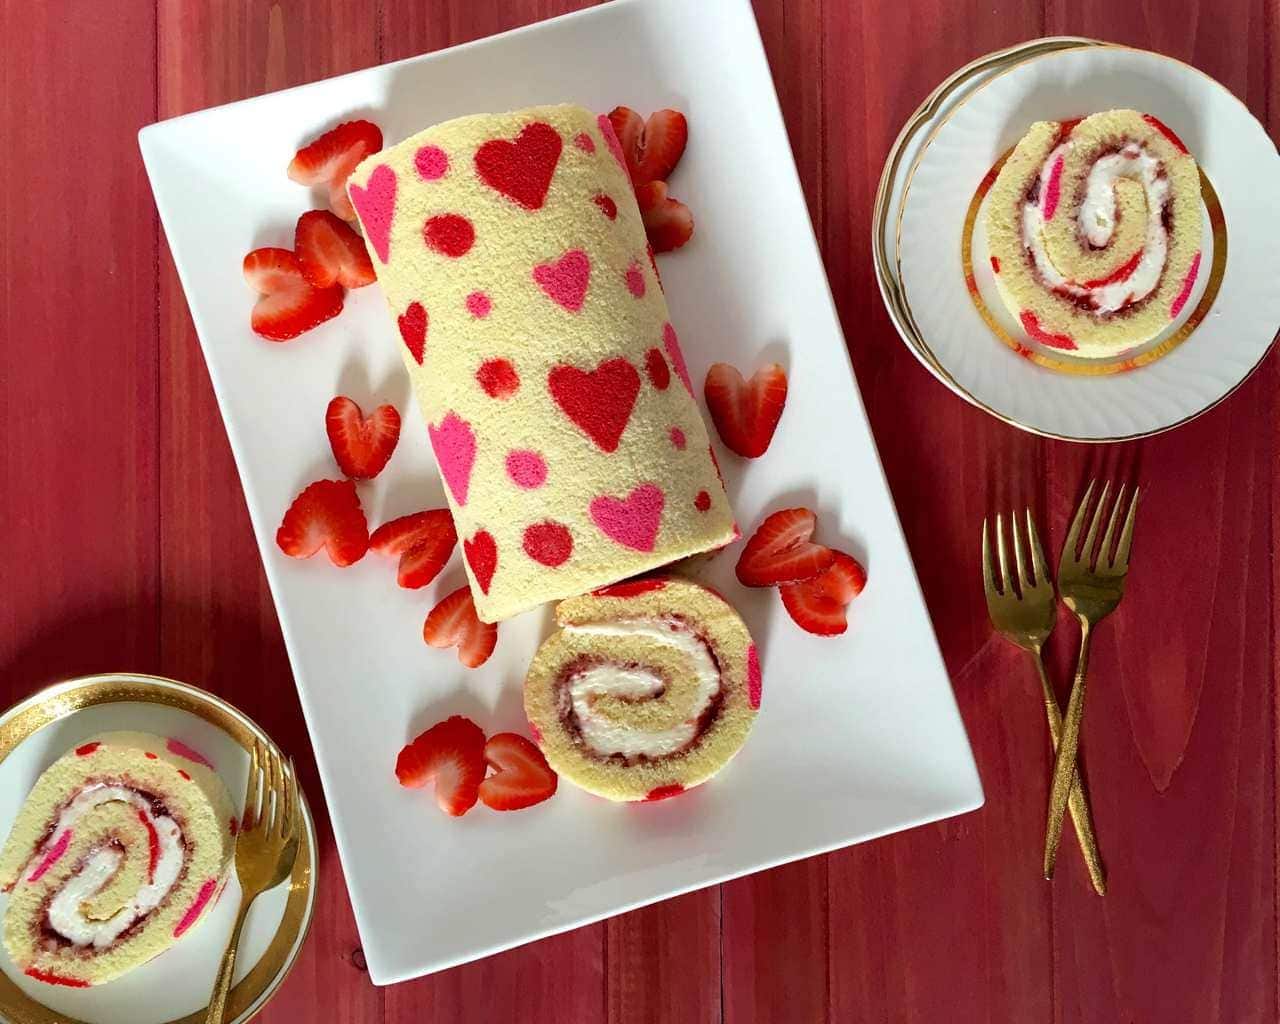 Overhead view of a strawberry roll cake decorated with hearts